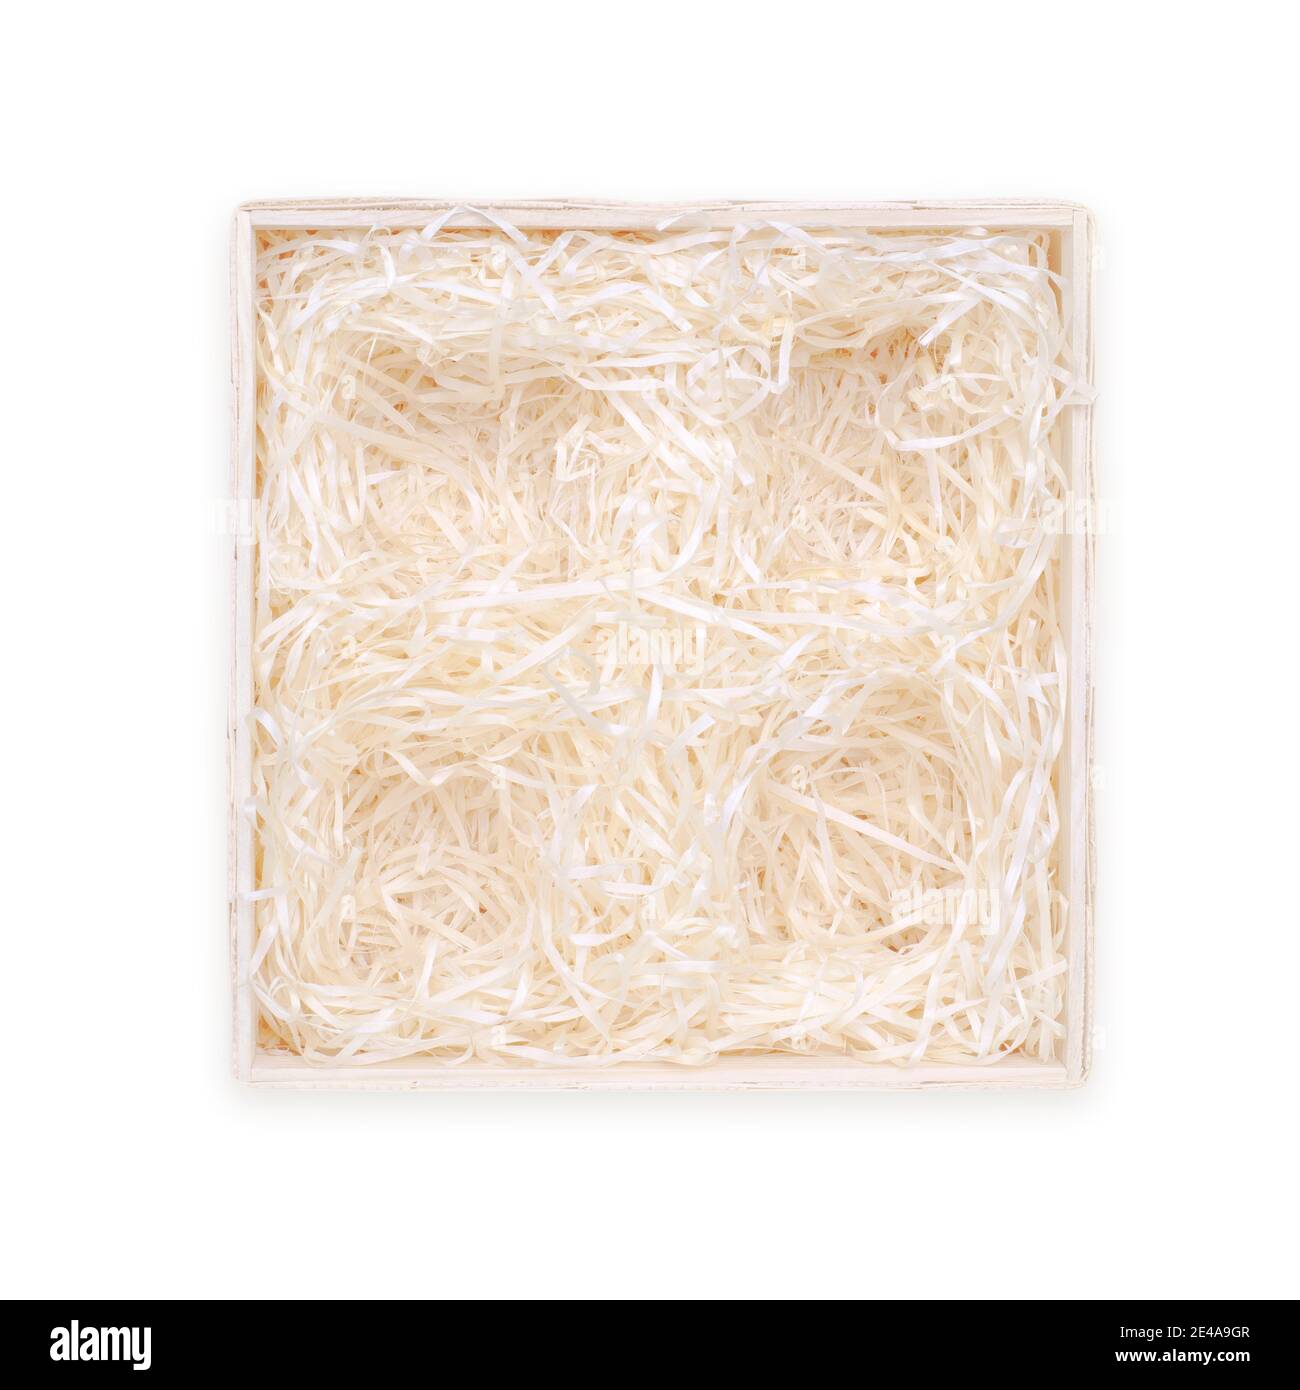 Top view of wooden box for eco gift filled with decorative shredded white paper with four holes for gifts. Isolated on white, clipping path included. Stock Photo